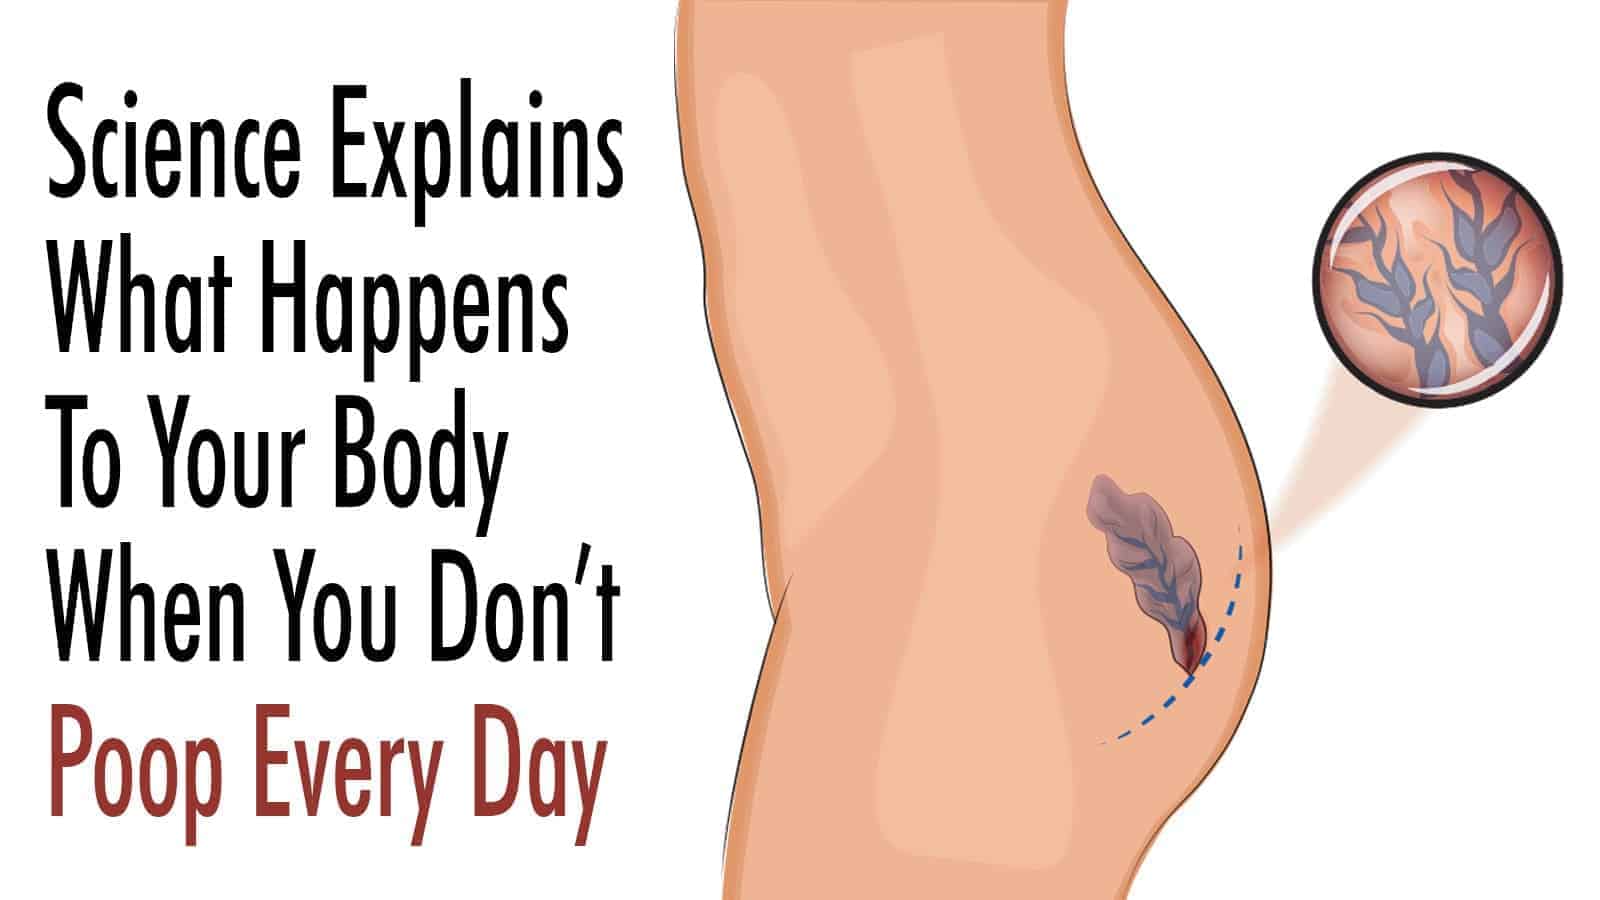 Science Explains What Happens To Your Body When You Don’t Poop Every Day